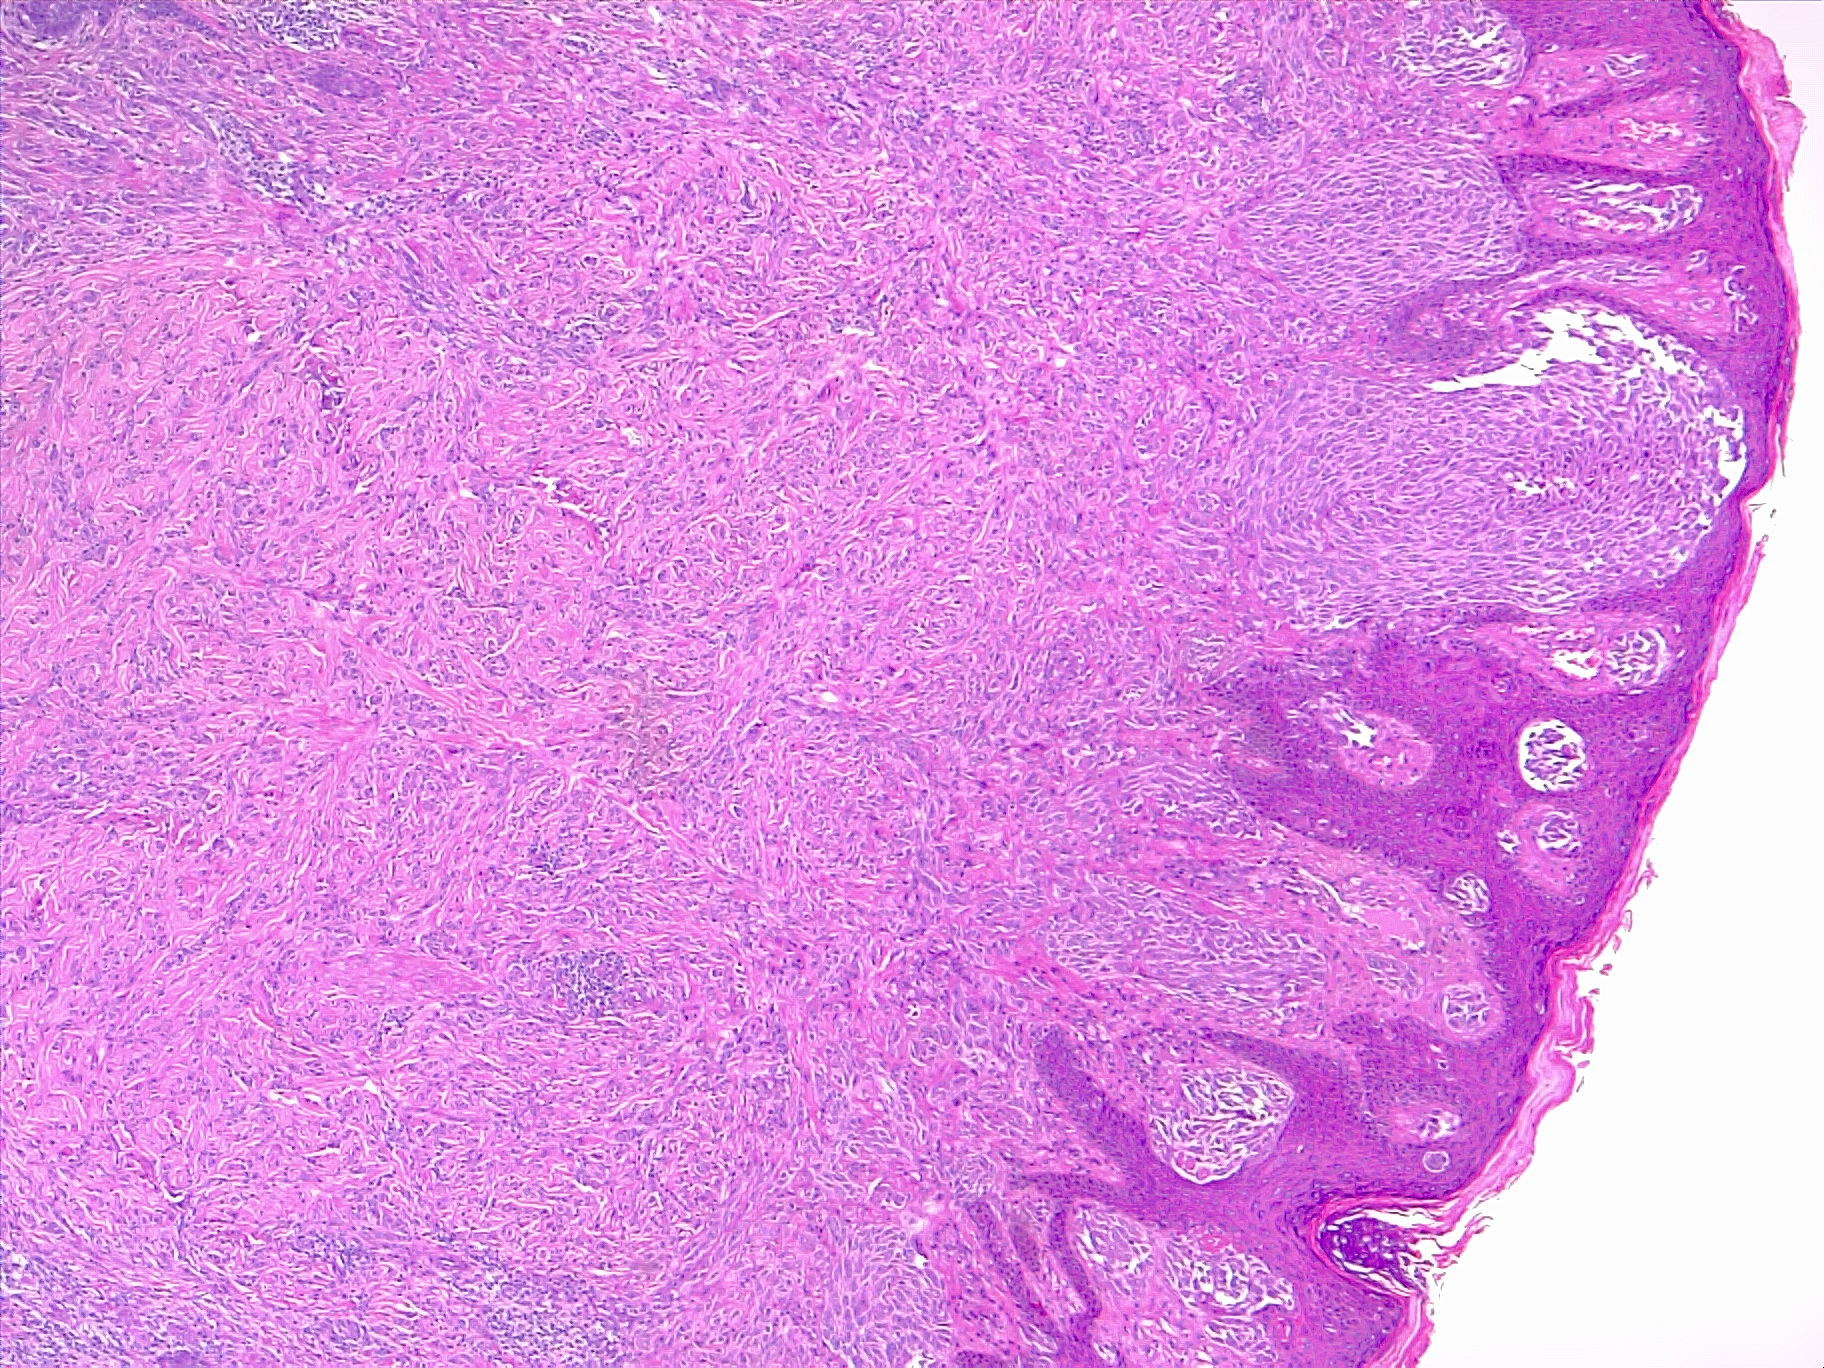 Atypical proliferation of melanocytes in the dermis, in a diffuse pattern. The architecture is altered, epidermal invasion and erosion. Melanoma. H/E 4x